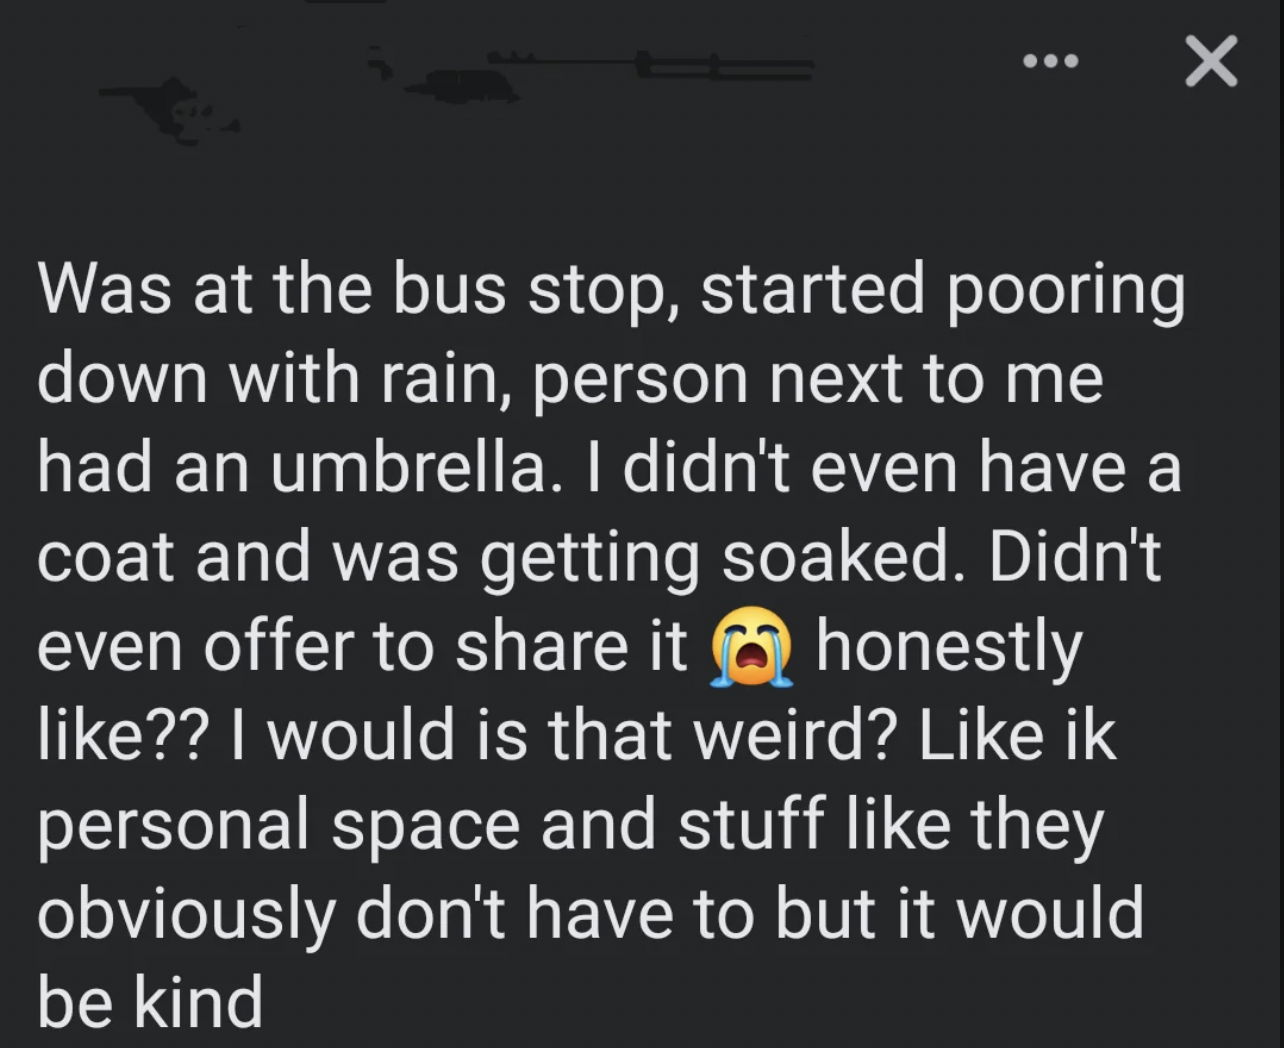 screenshot - Was at the bus stop, started pooring down with rain, person next to me had an umbrella. I didn't even have a coat and was getting soaked. Didn't even offer to it honestly ?? I would is that weird? ik personal space and stuff they obviously do